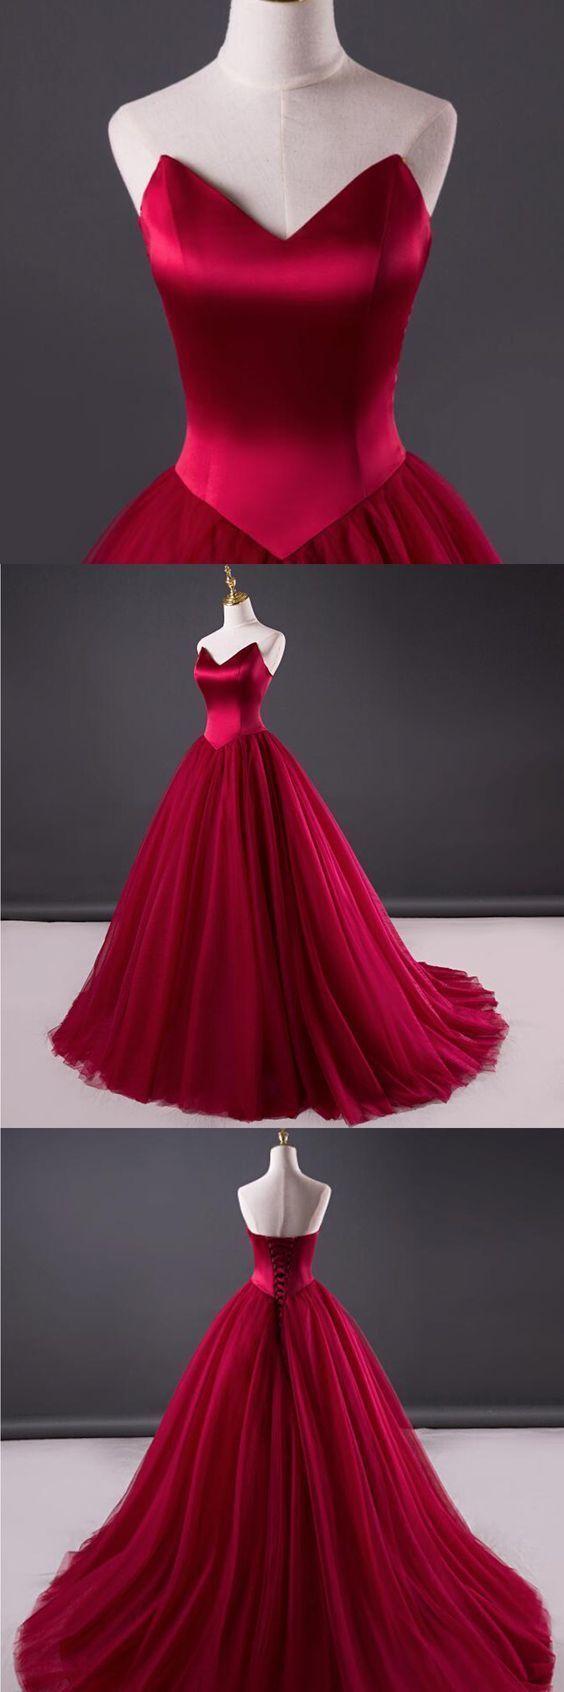 Wedding - Charming Sweetheart A-Line Prom Dresses,Long Prom Dresses,Cheap Prom Dresses, Evening Dress Prom Gowns, Formal Women Dress,Prom Dress,112601